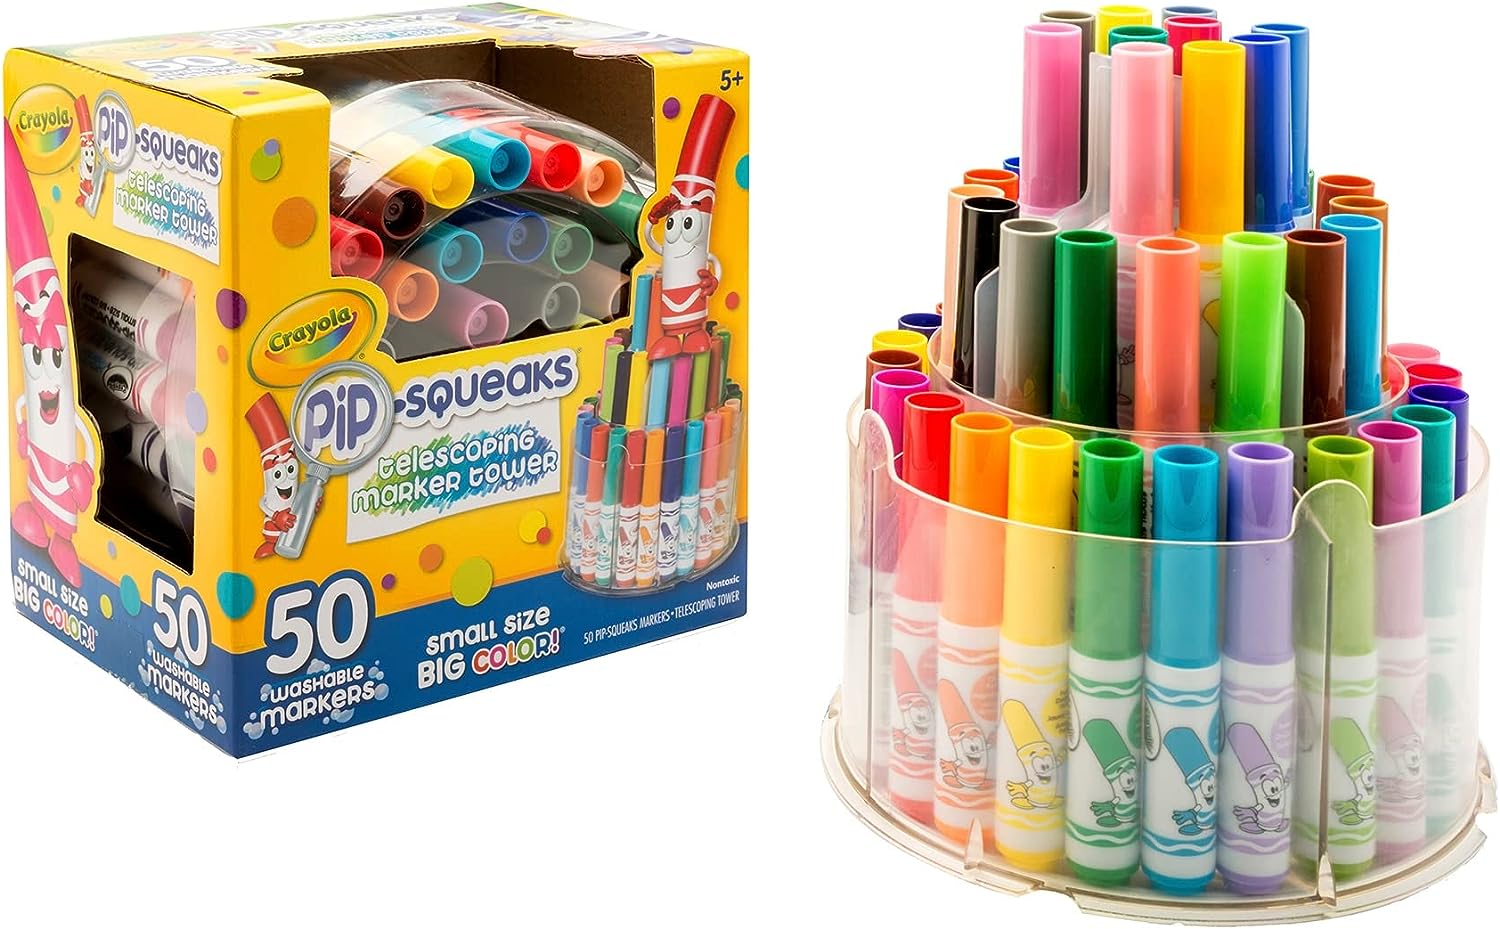 Crayola 50 Washable Markers Pip-squeaks